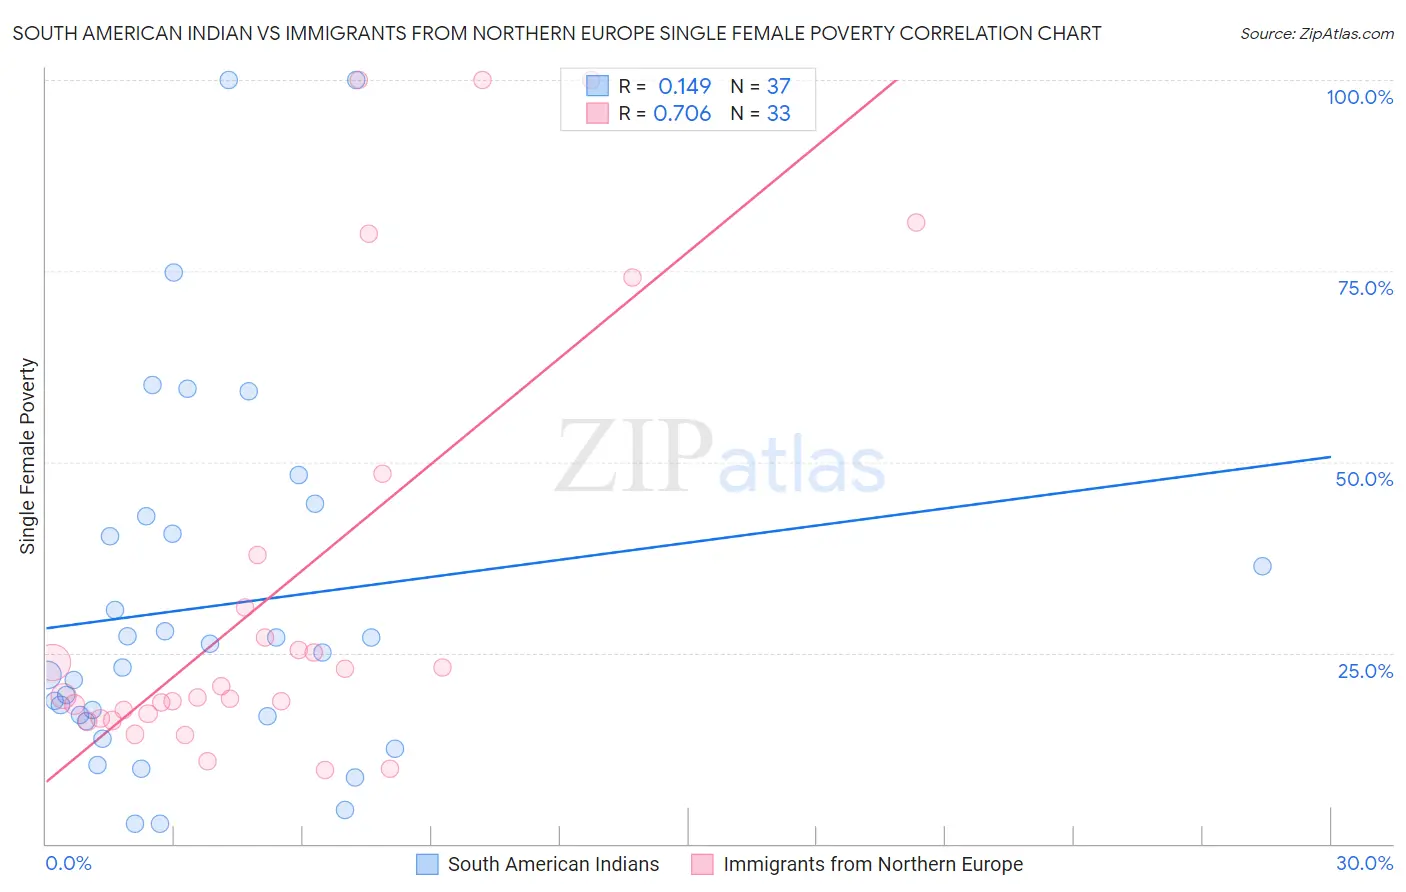 South American Indian vs Immigrants from Northern Europe Single Female Poverty